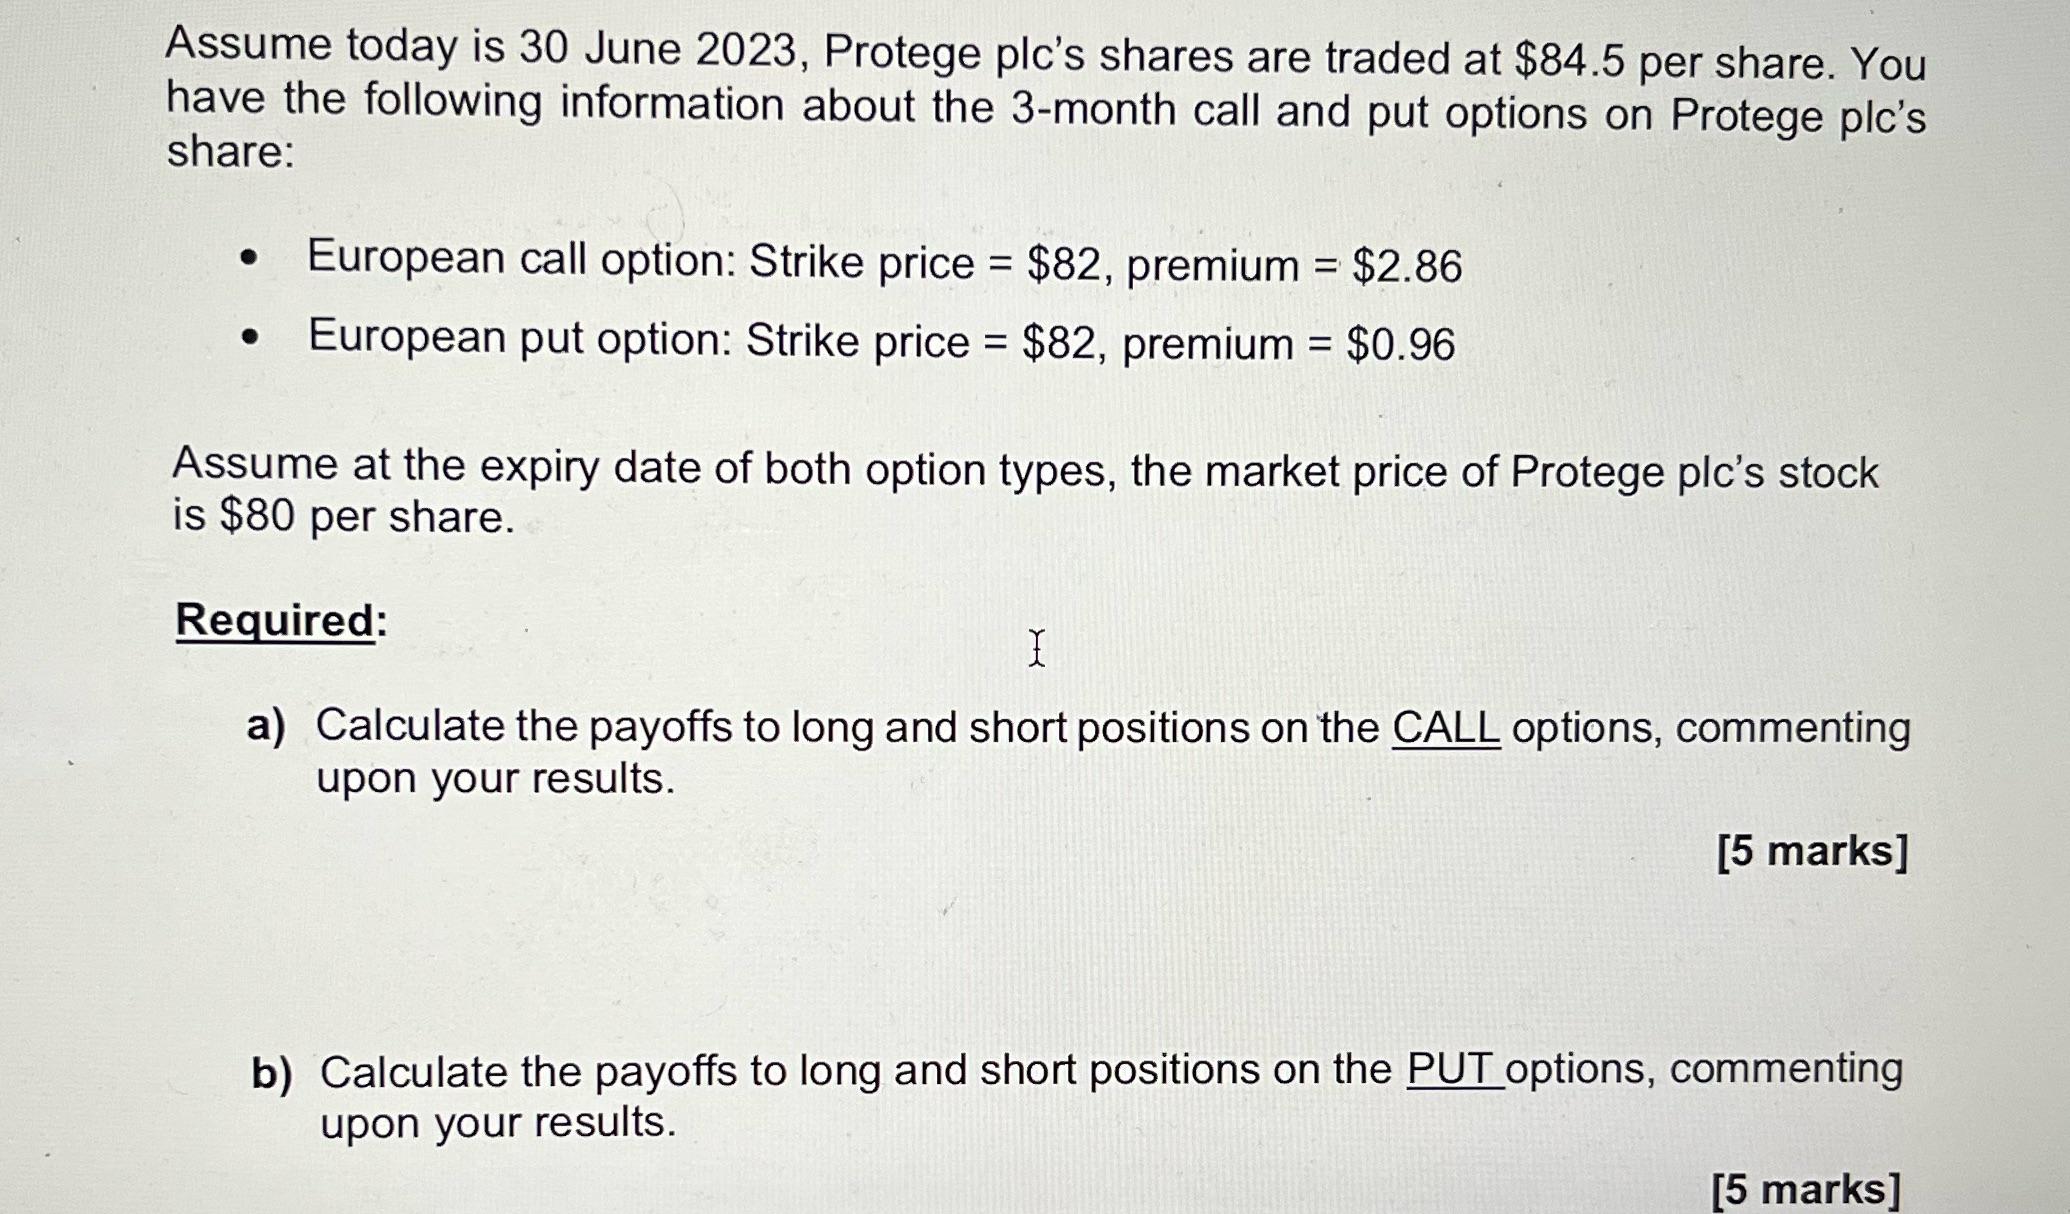 Assume today is 30 June 2023, Protege plc's shares are traded at $84.5 per share. You have the following